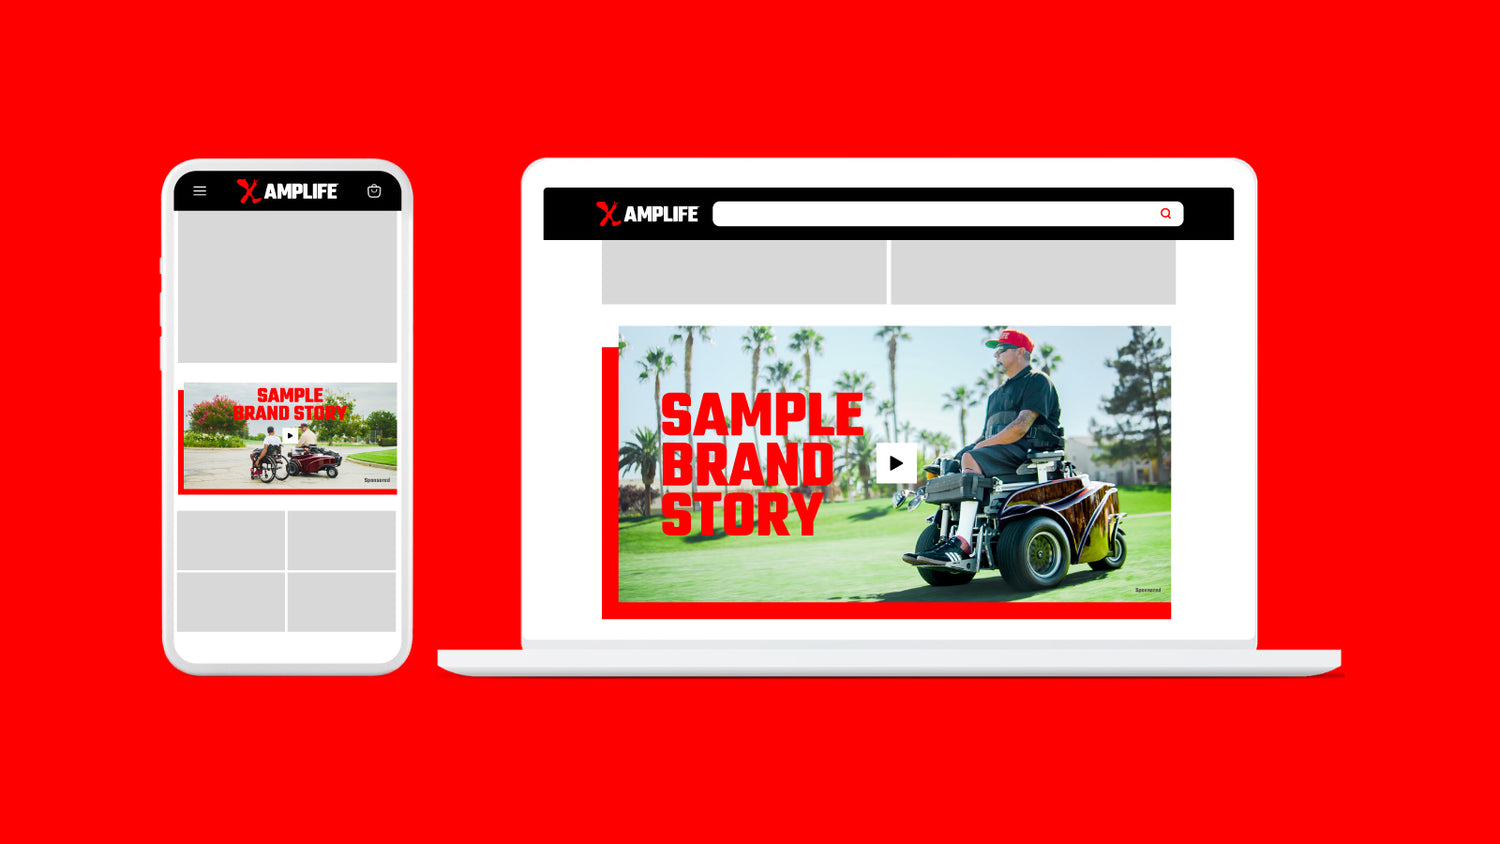 AMPLIFE ADVERTISING SPONSORED SHOPPABLE IMAGE EXAMPLE ON DESKTOP AND MOBILE